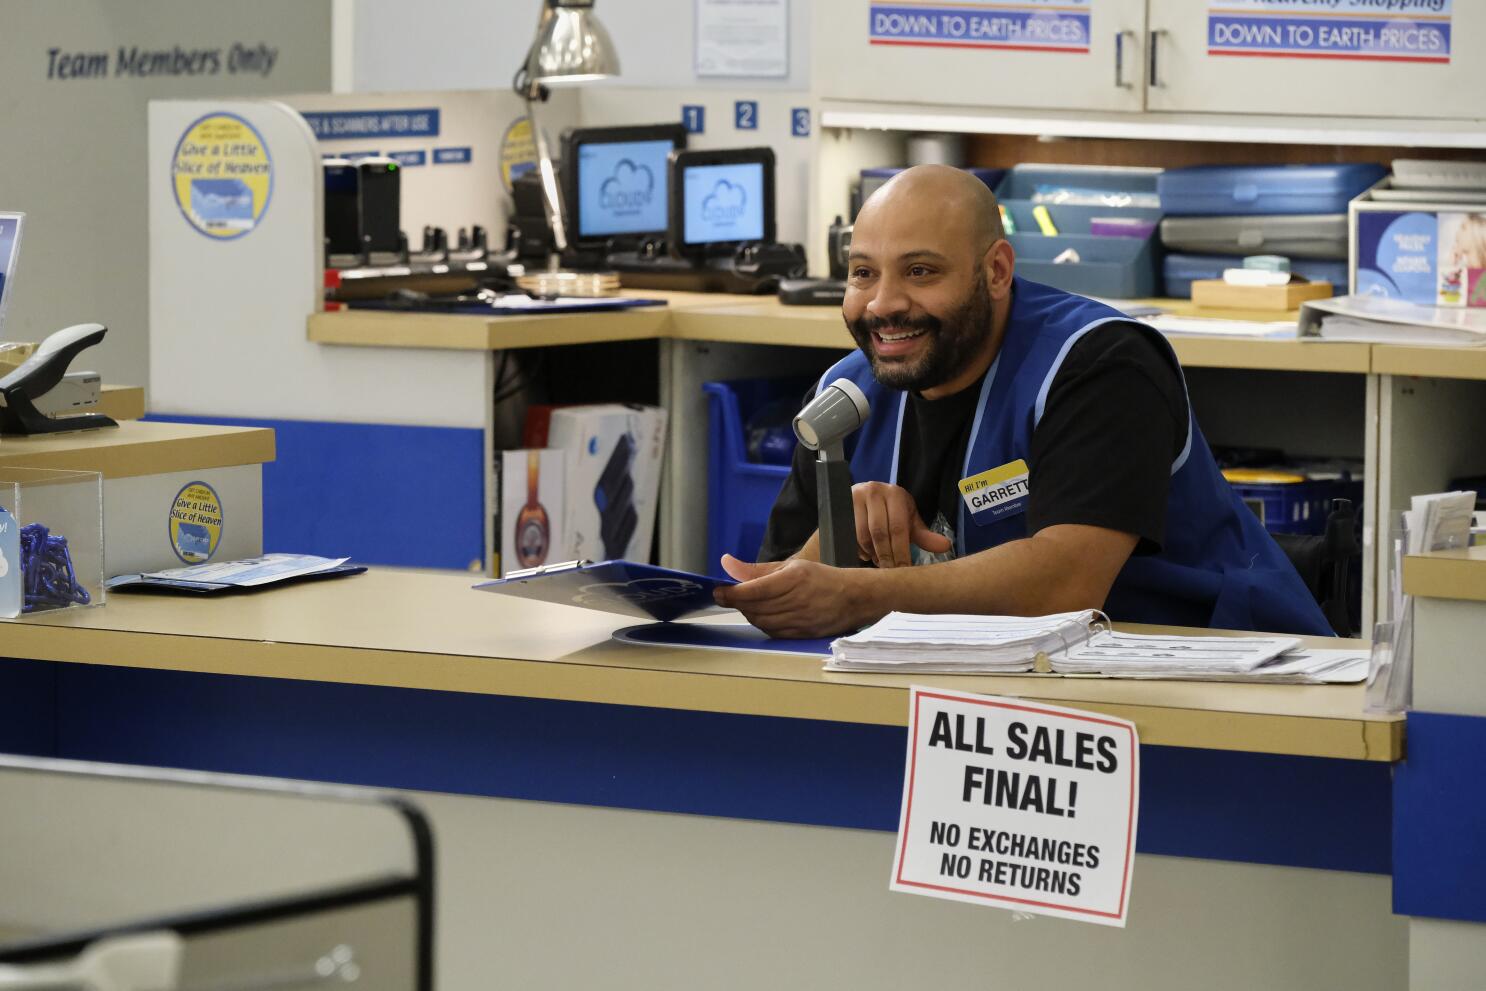 How 'Superstore' Made COVID a Character in Season 6